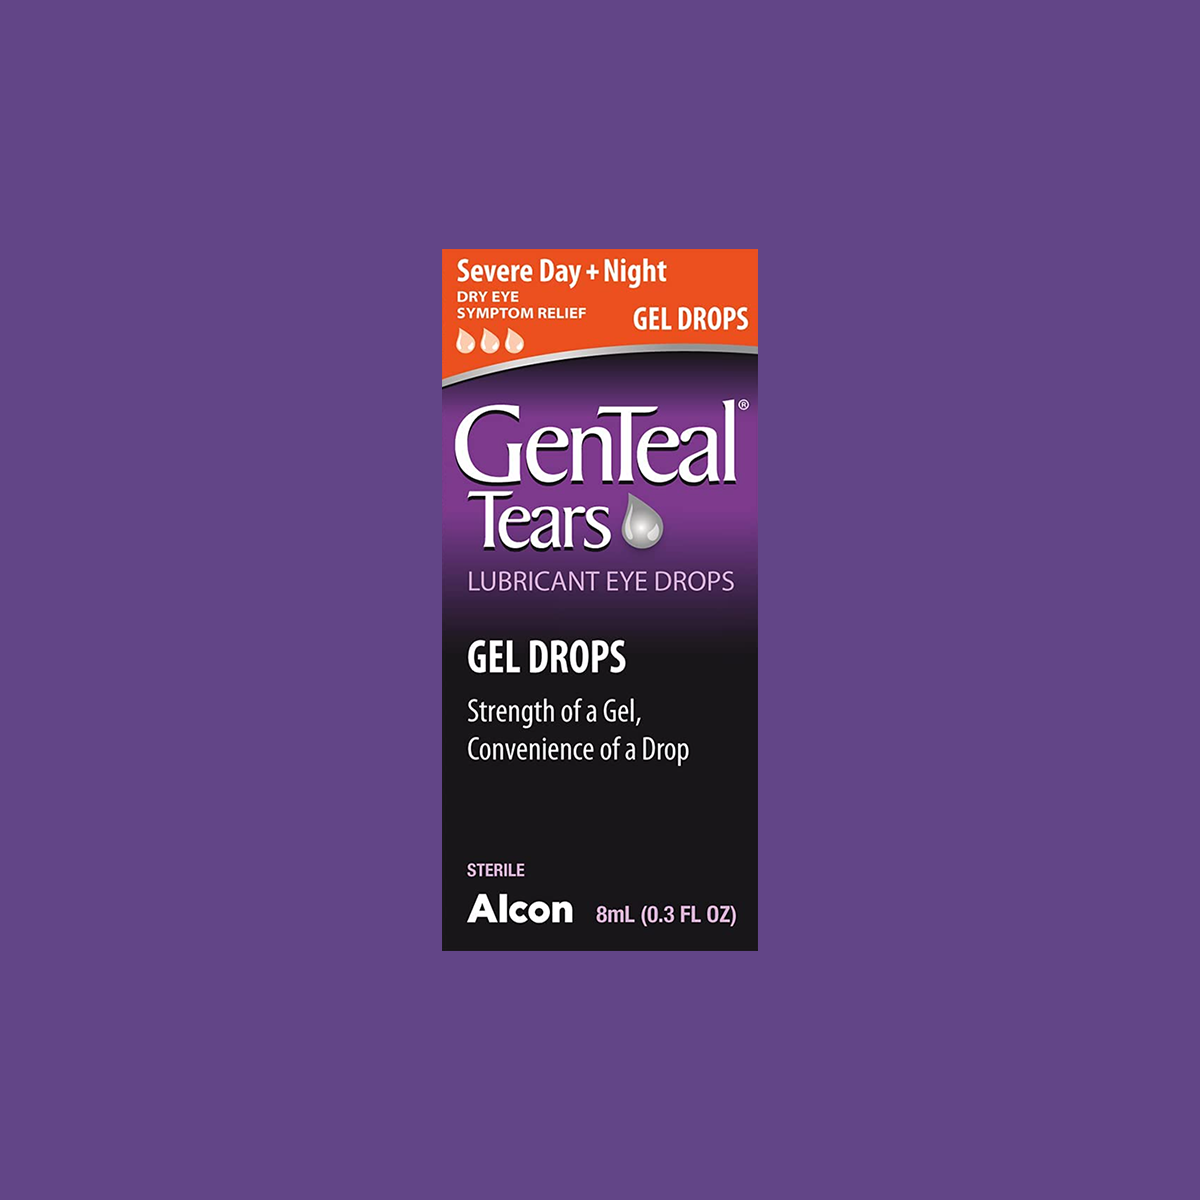 GenTeal Tears Lubricant Gel Eye Drops for Severe Day and Night Relief (8mL 0.3 FL OZ)